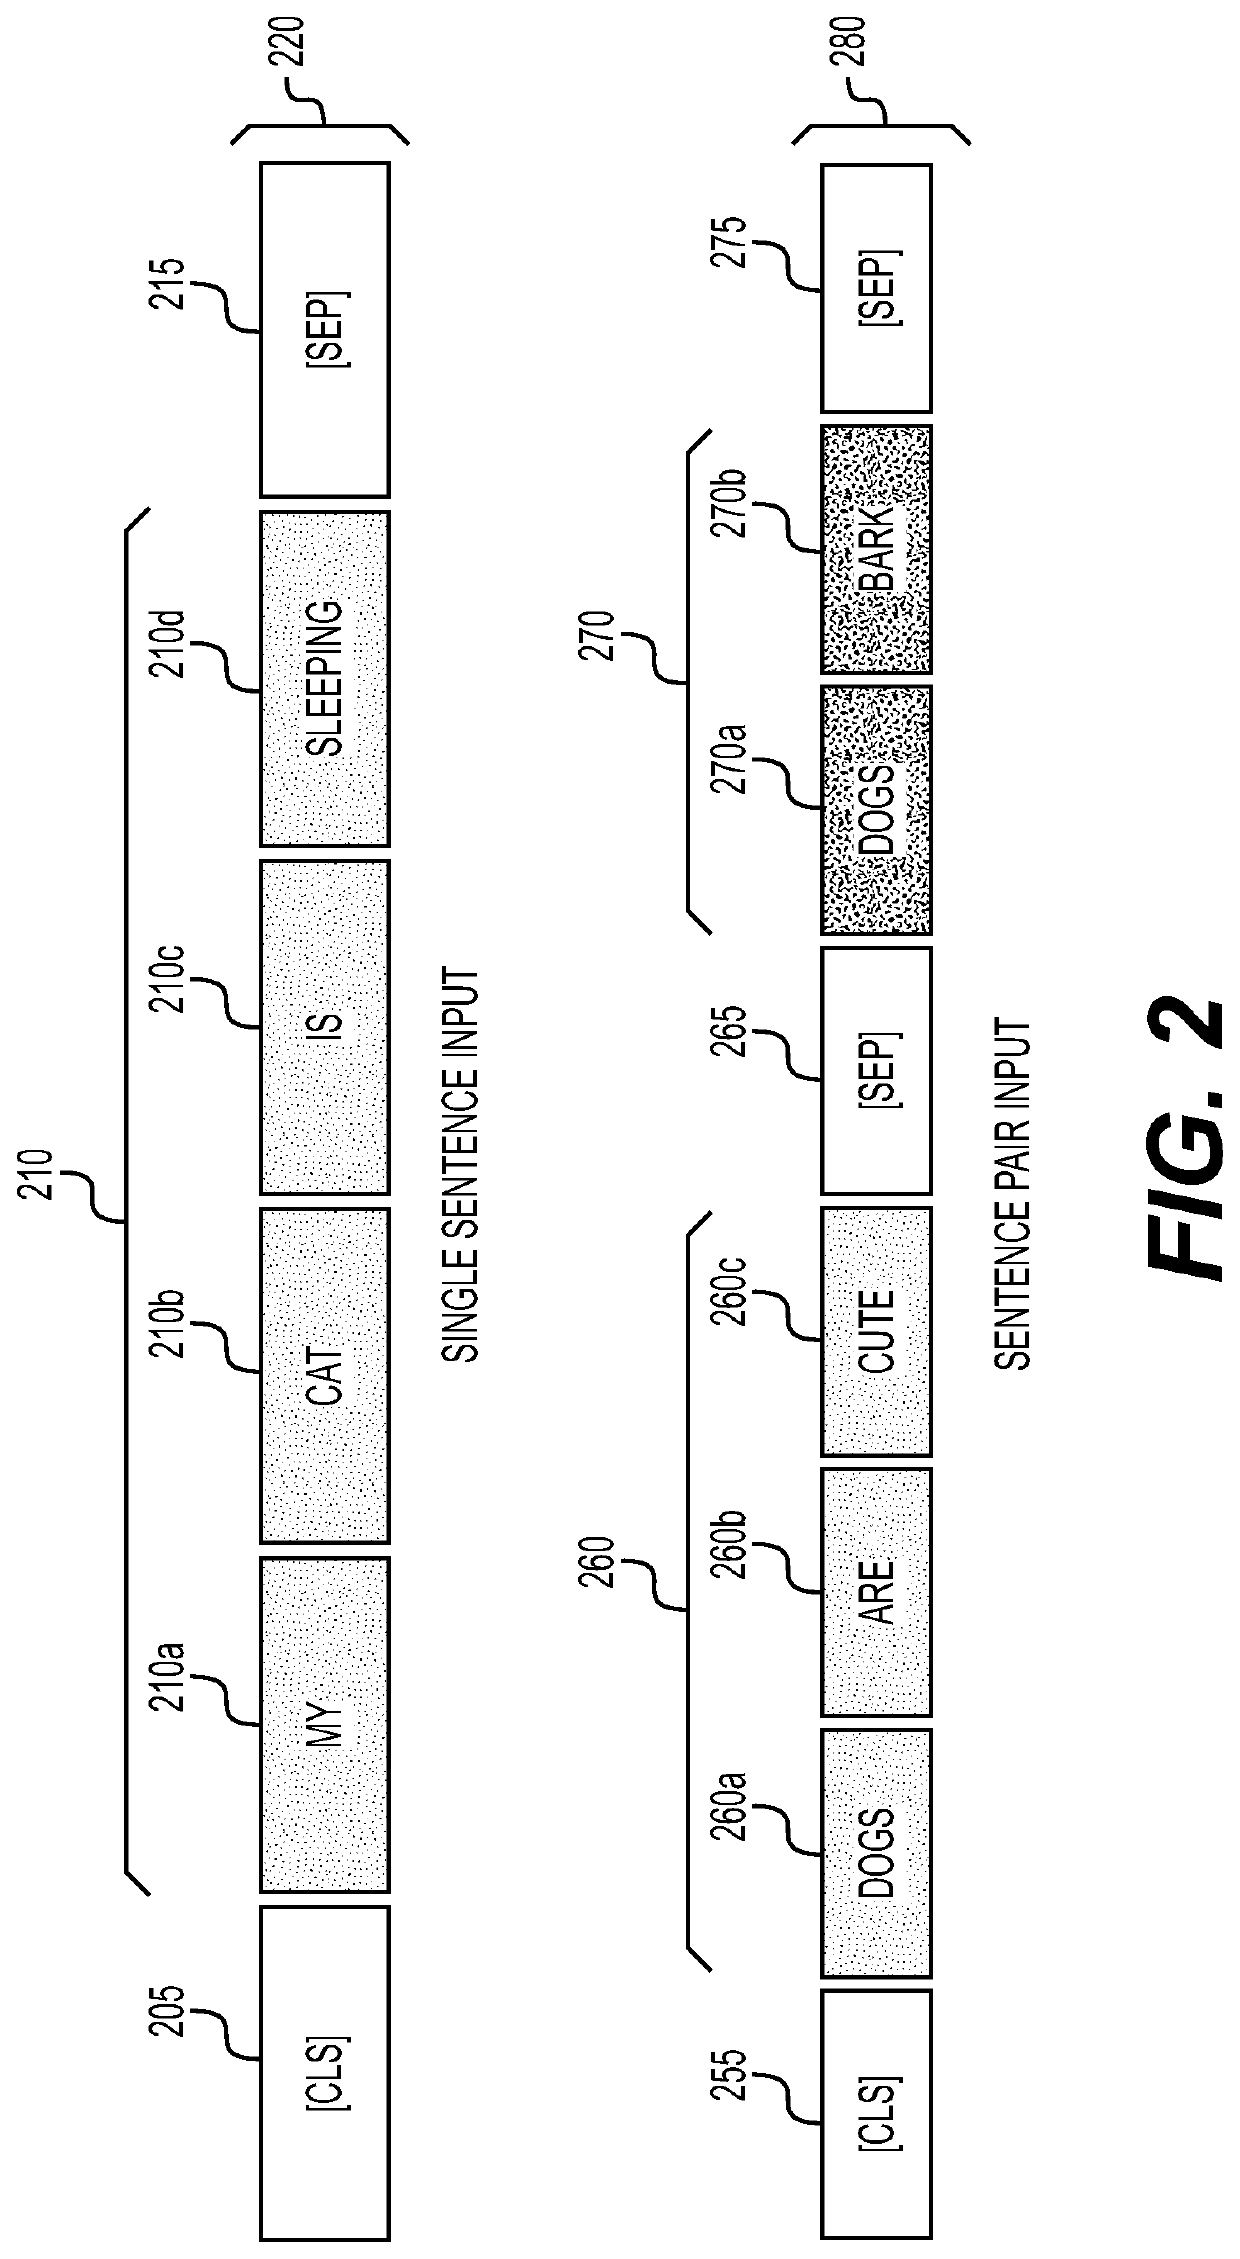 Methods and systems for determining characteristics of a dialog between a computer and a user